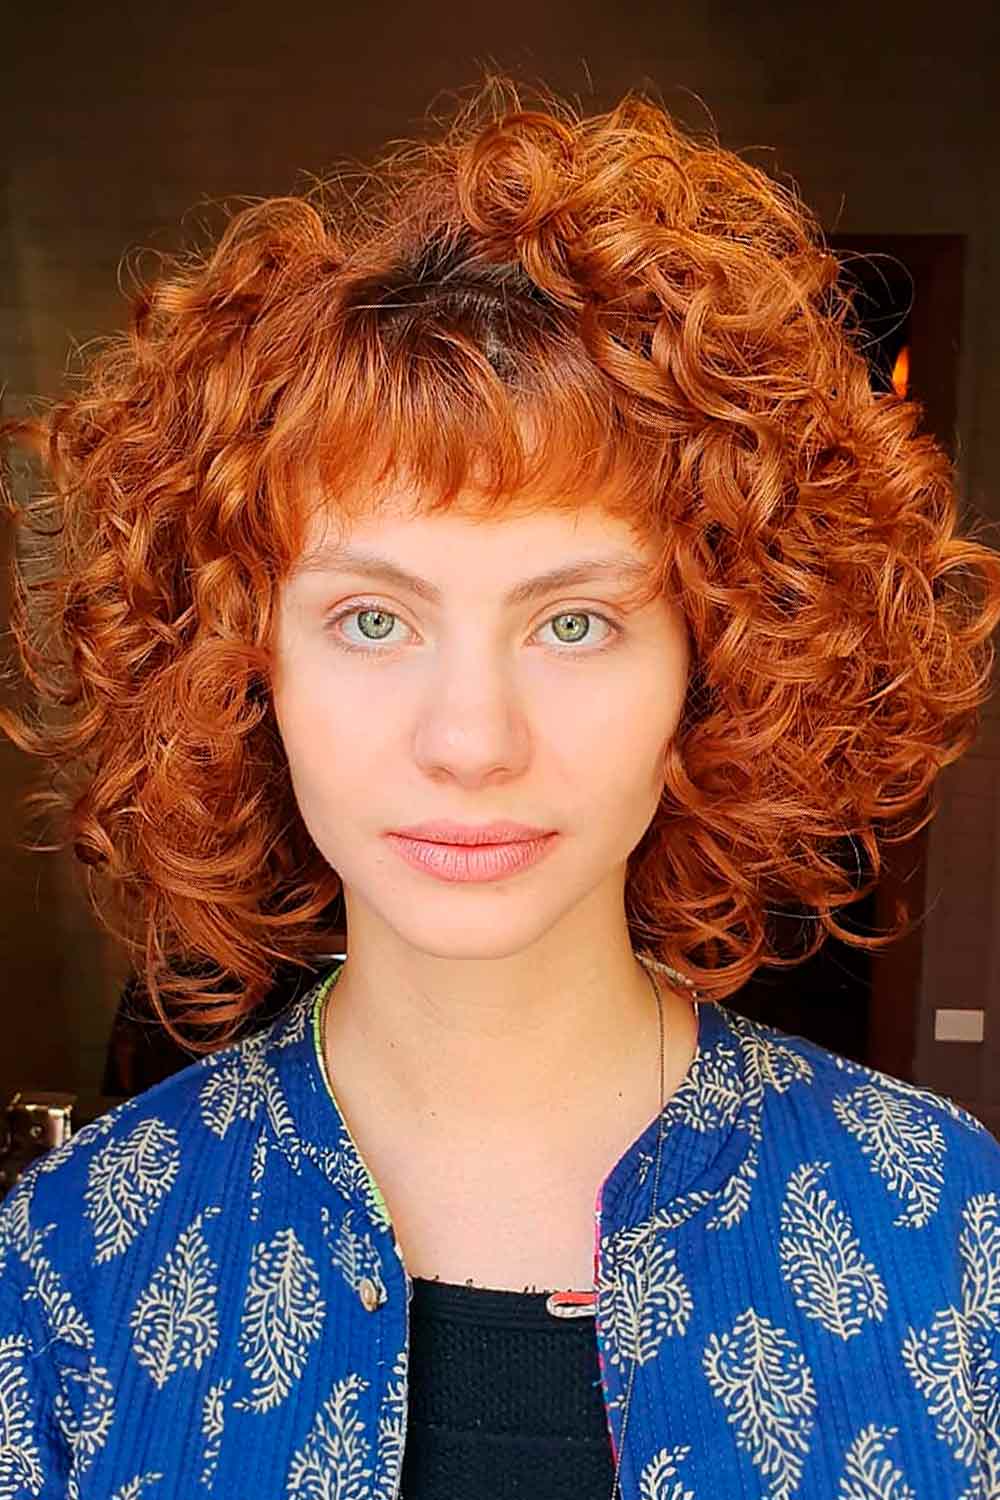 Short Curly Red Bob With Baby Bangs #curlybob #haircuts #bobhaircuts #curlyhairstyles